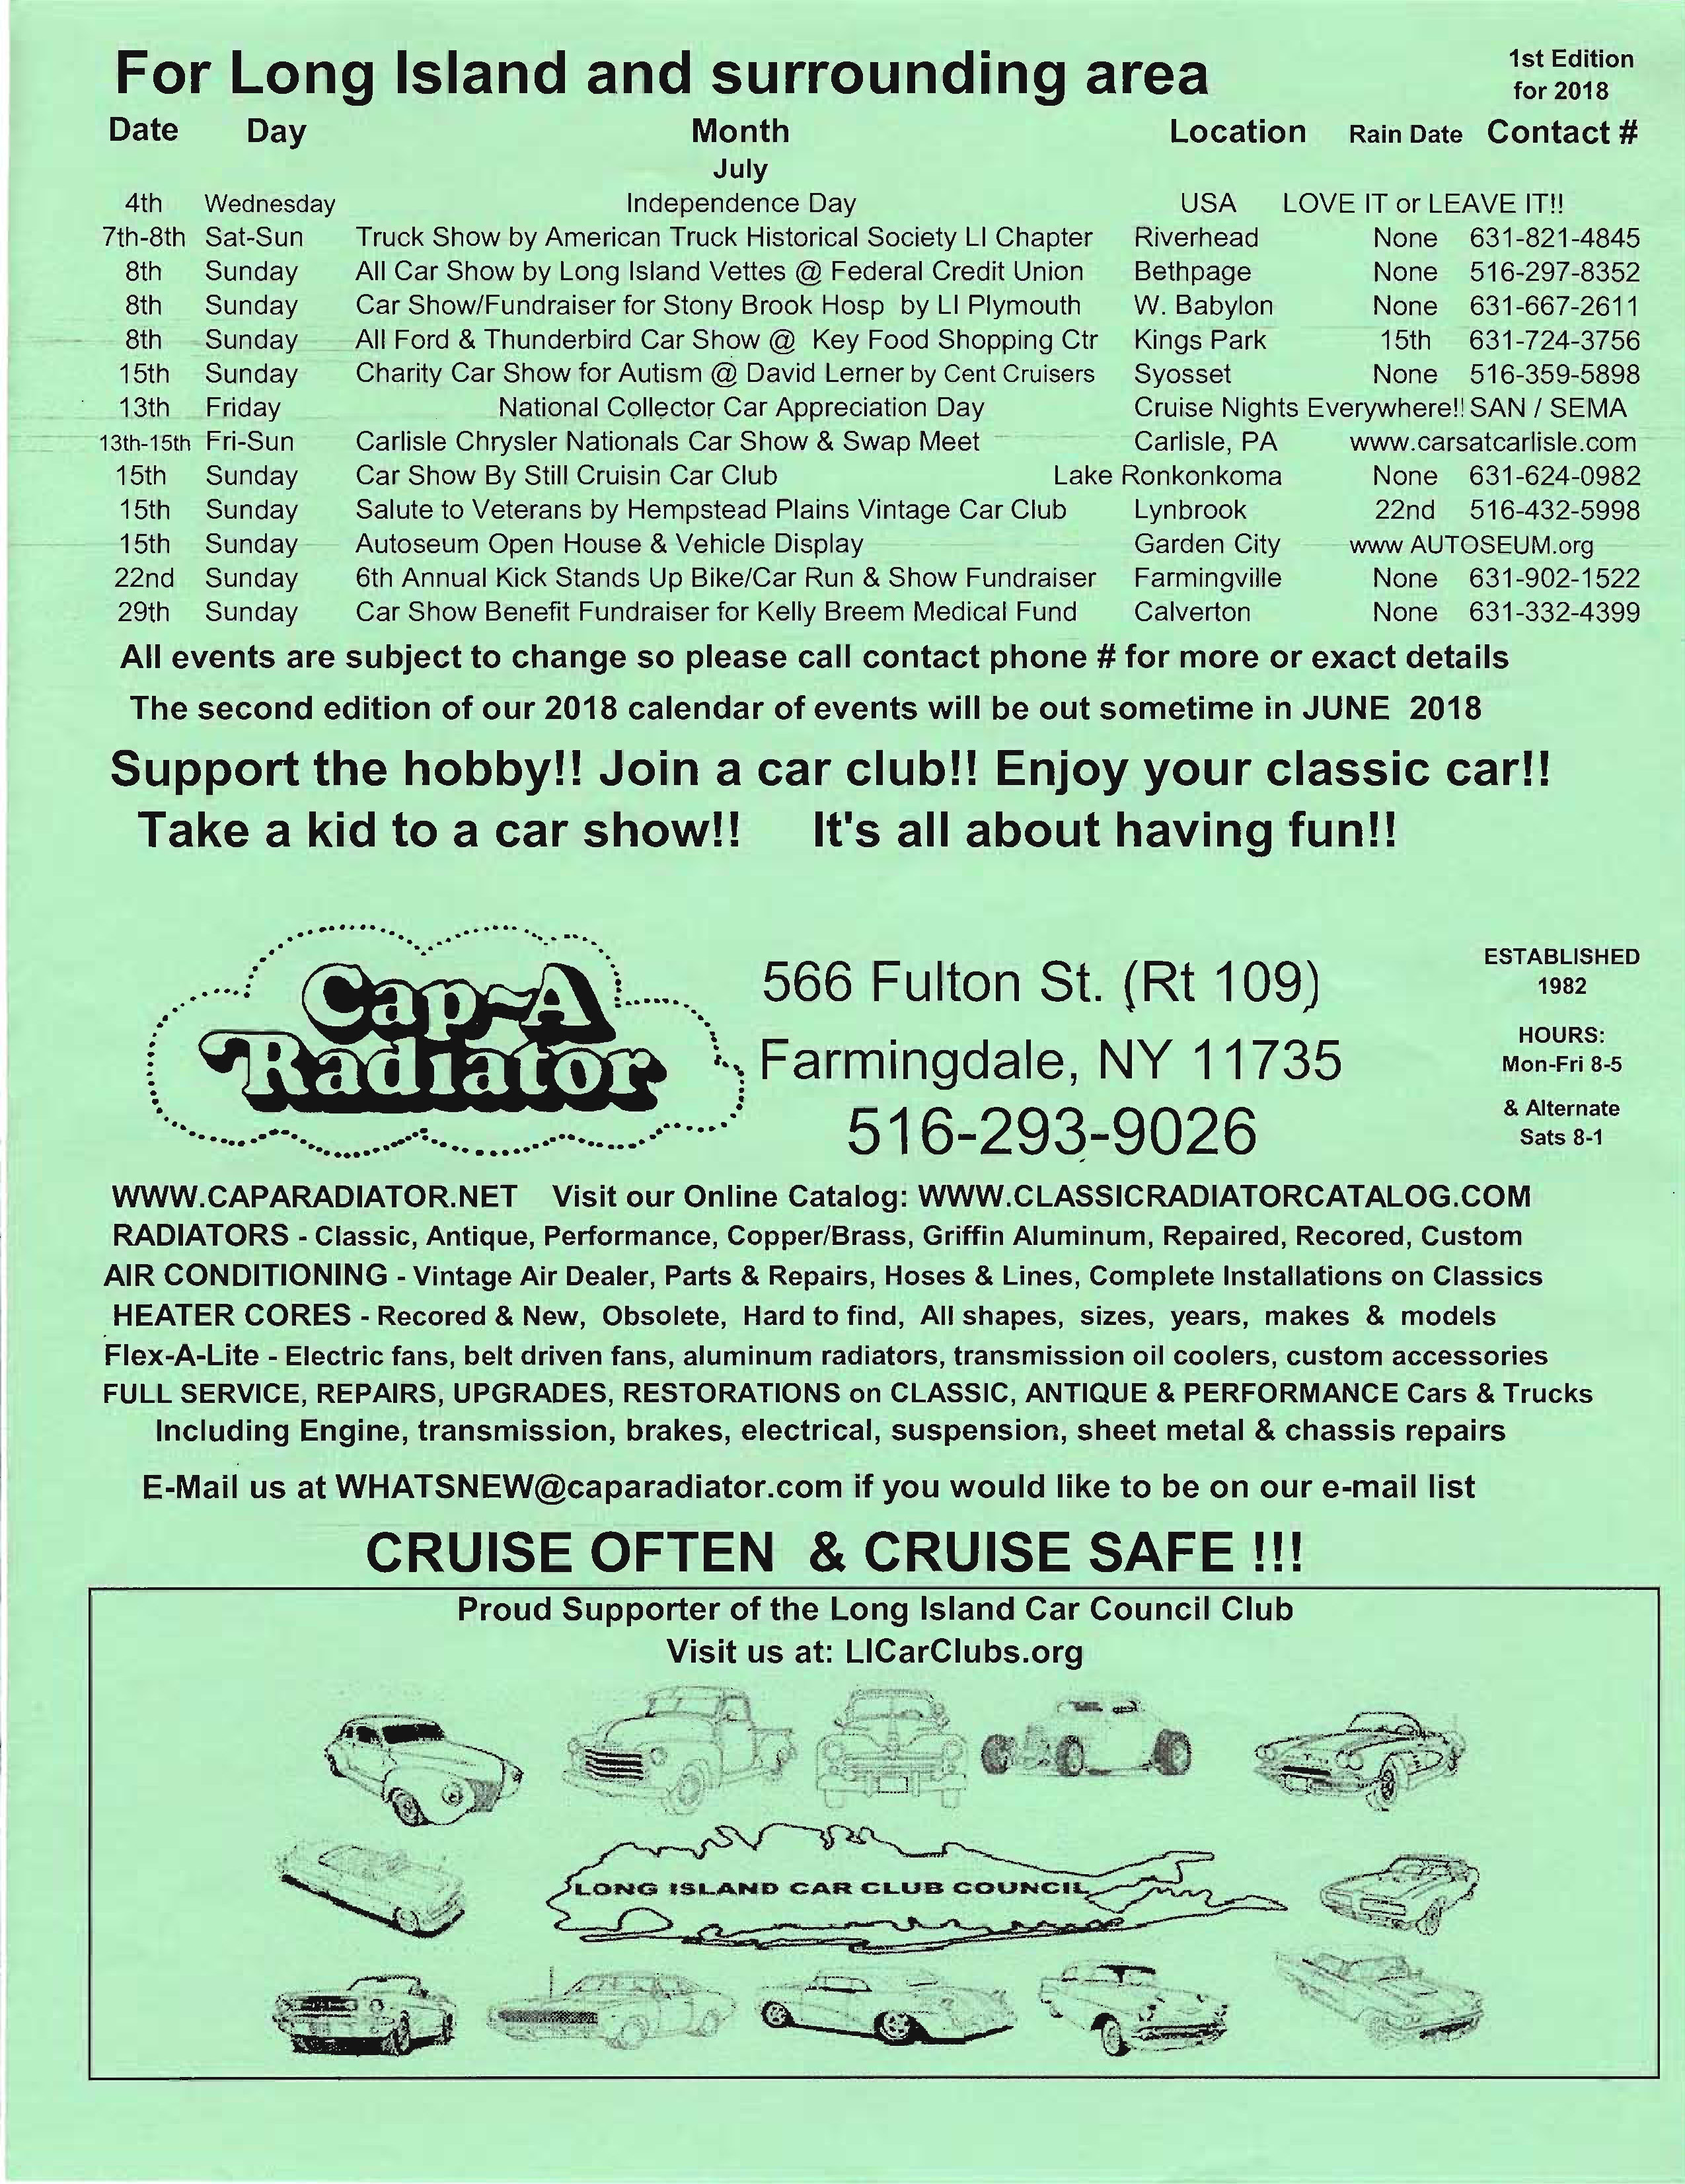 2018 Classic Car Calendar of Events First Edition through July Page 3